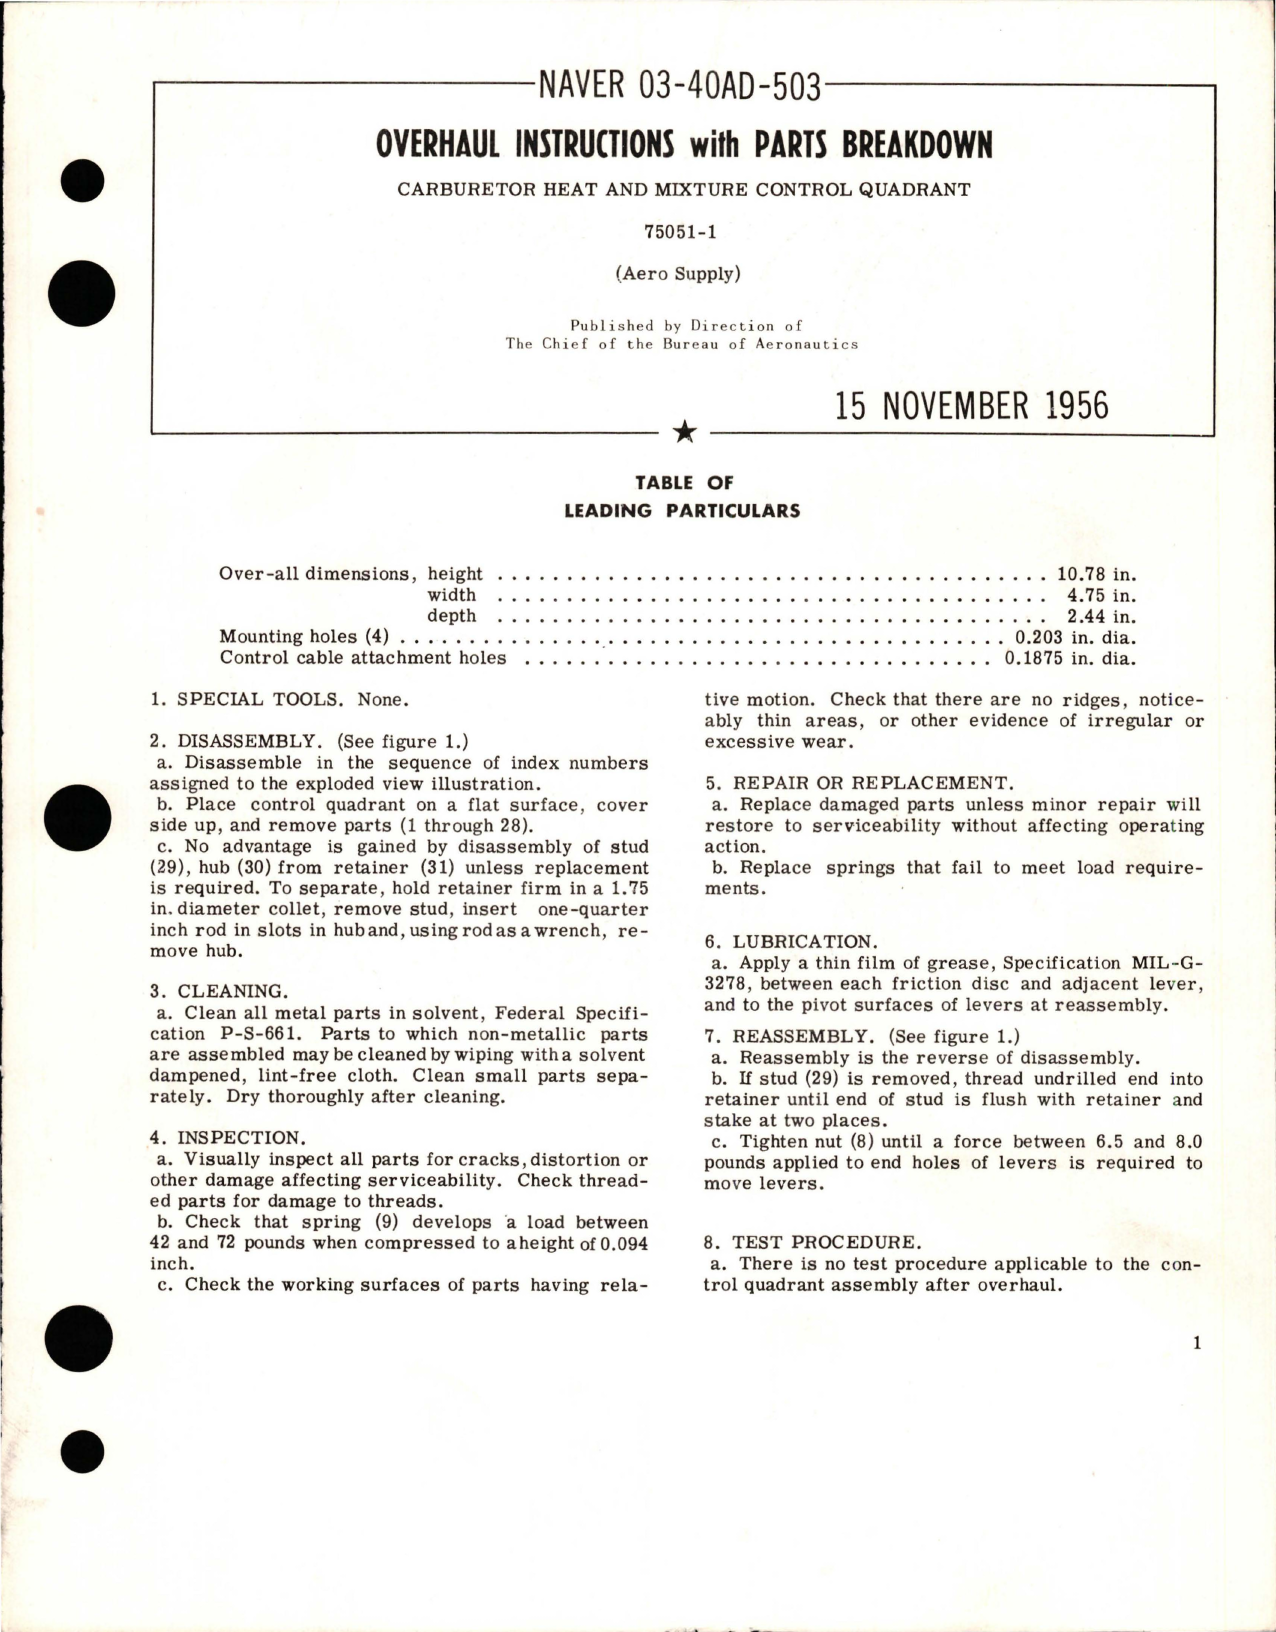 Sample page 1 from AirCorps Library document: Overhaul Instructions with Parts Breakdown for Carburetor Heat and Mixture Control Quadrant - 75051-1